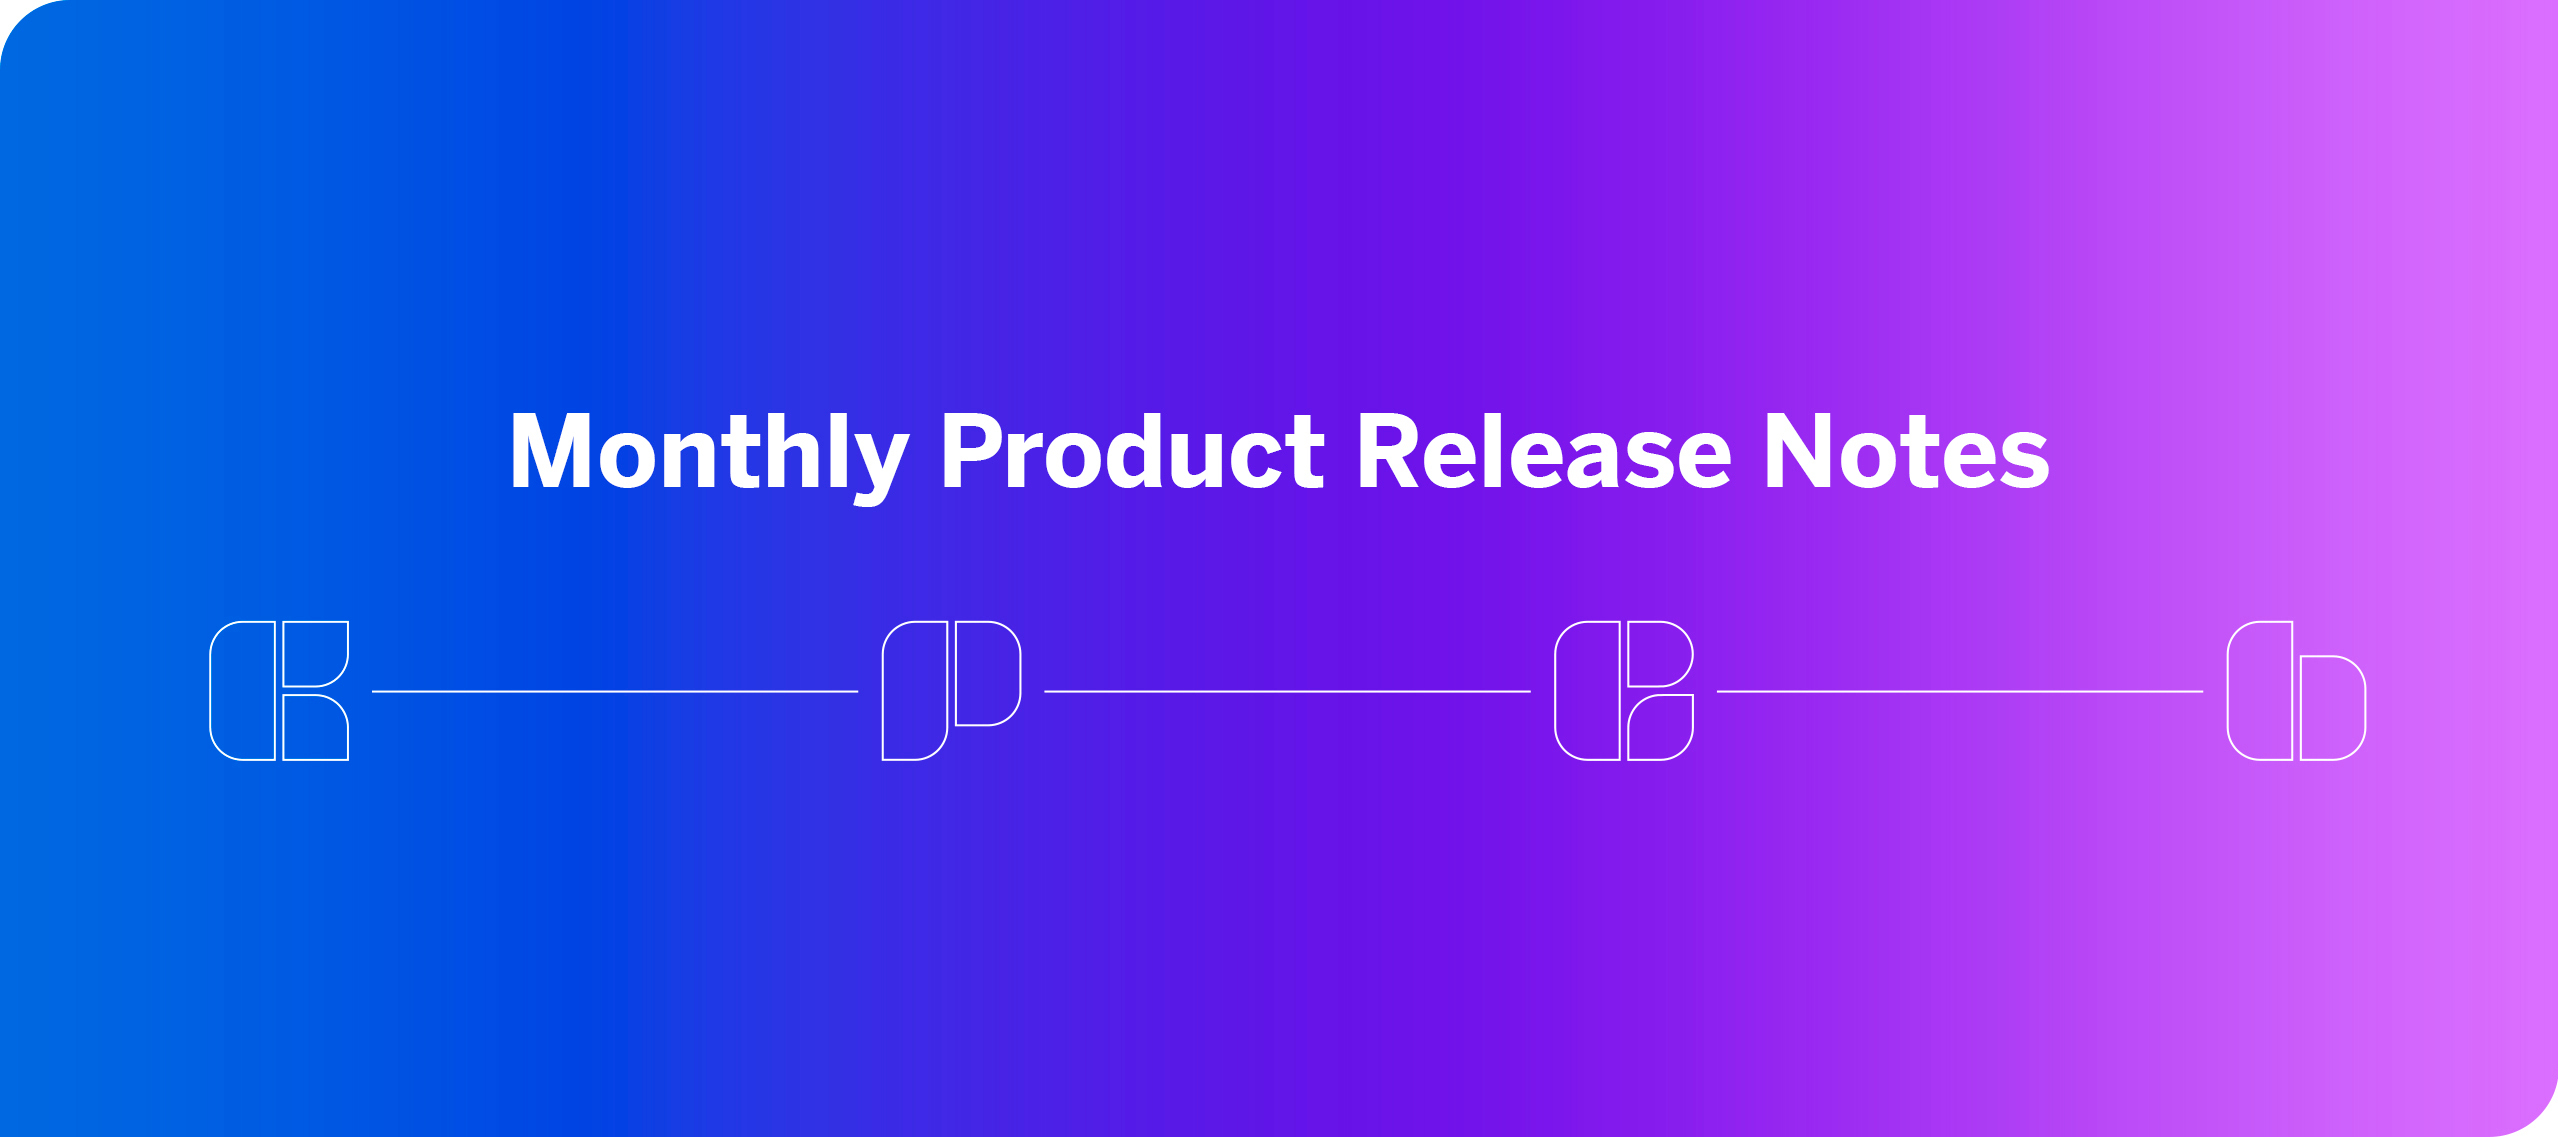 Monthly Product Release Notes - July 6, 2023 to August 2, 2023